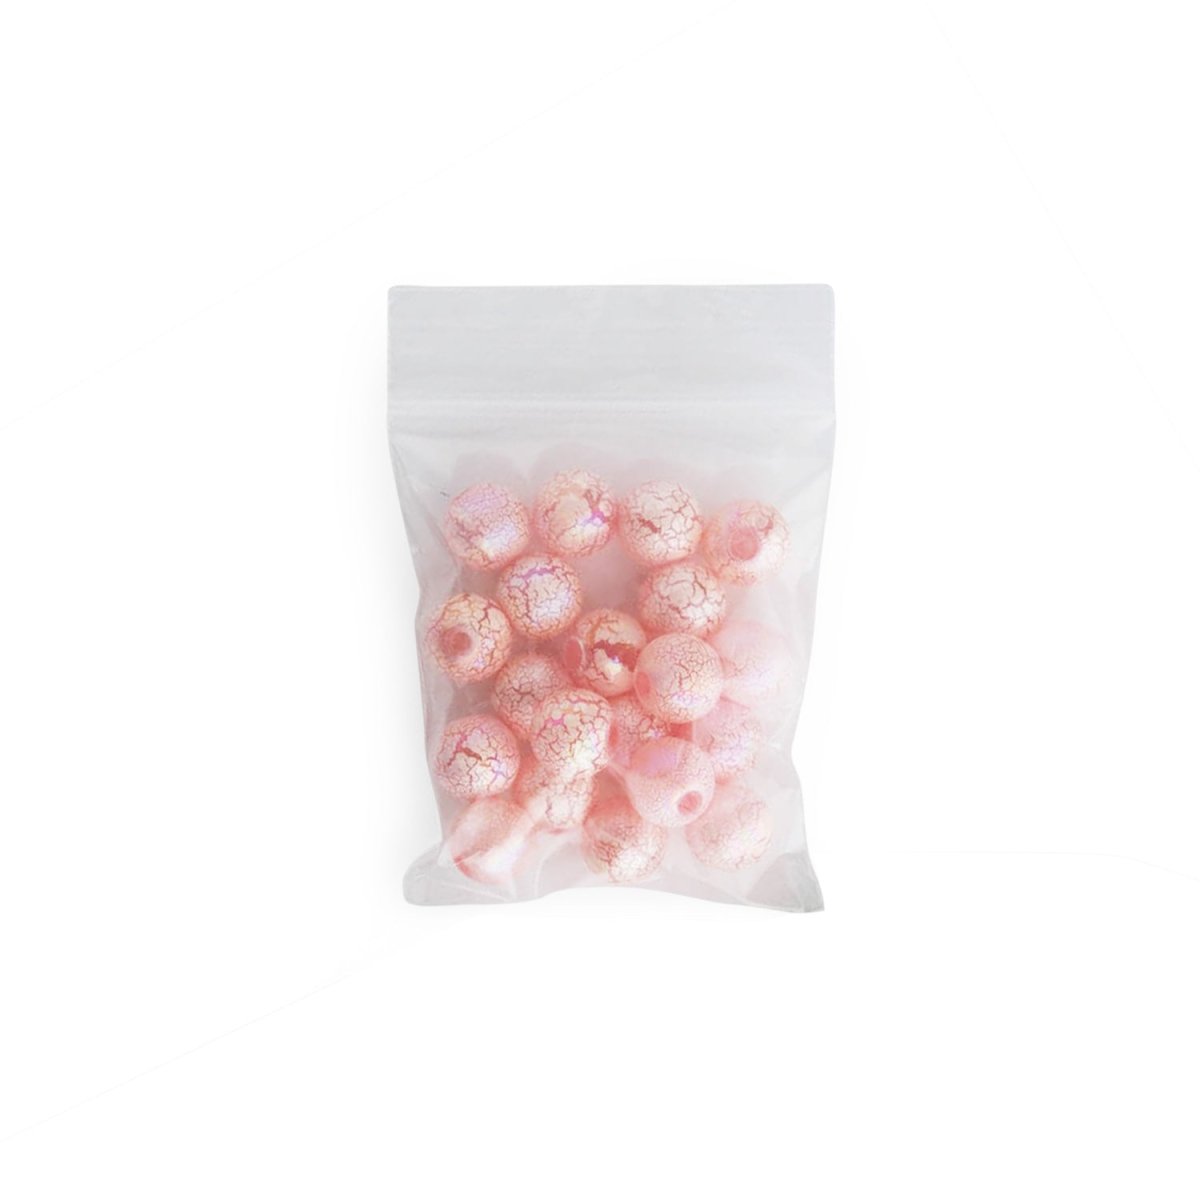 Acrylic Round Beads Crackled Paint Pink AB from Cara & Co Craft Supply